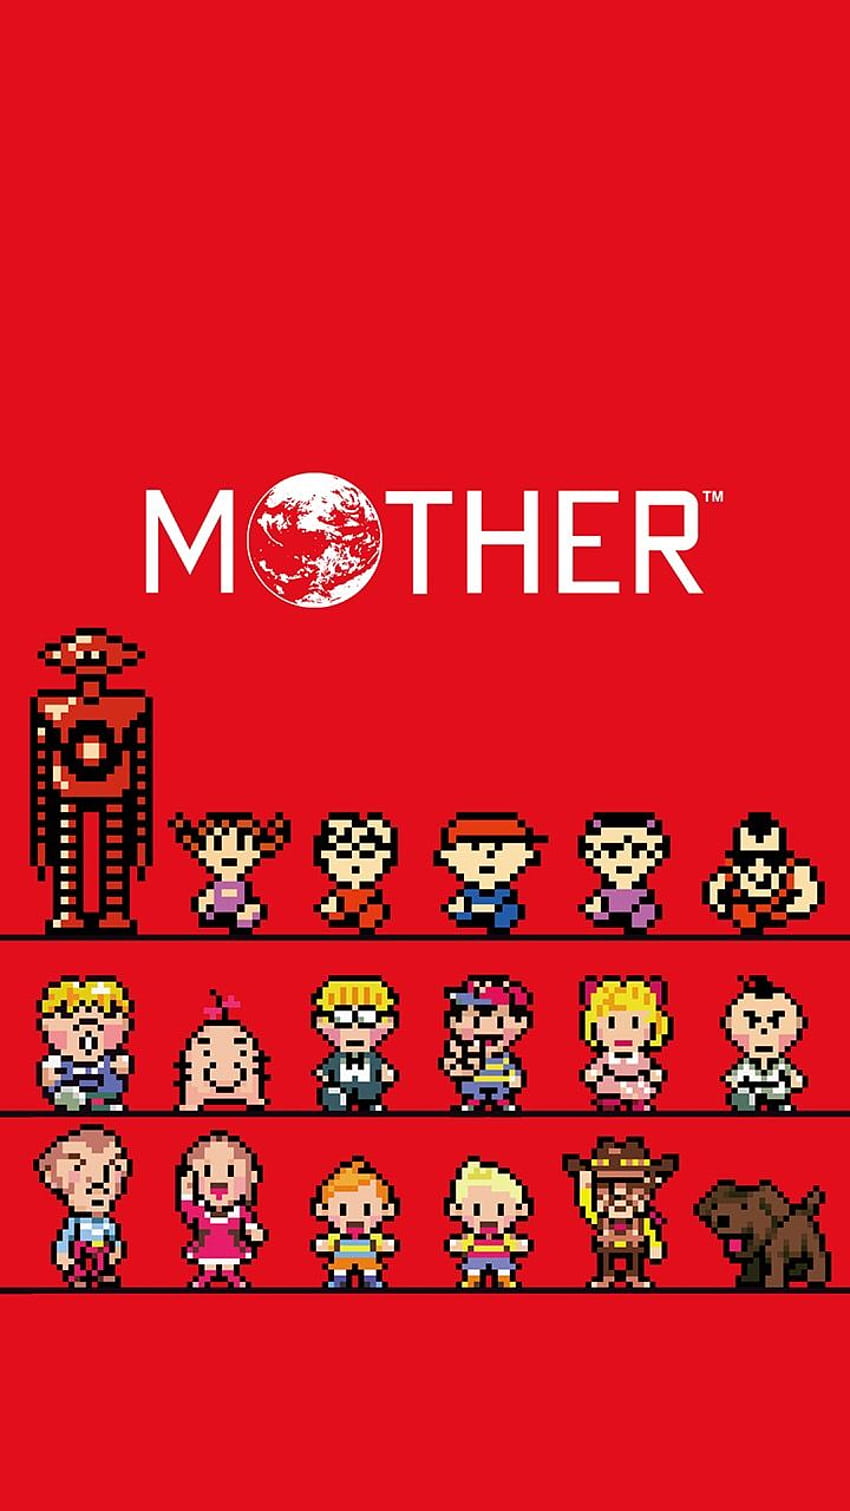 Nintendo's LINE account sends out Mother mobile phone HD phone wallpaper